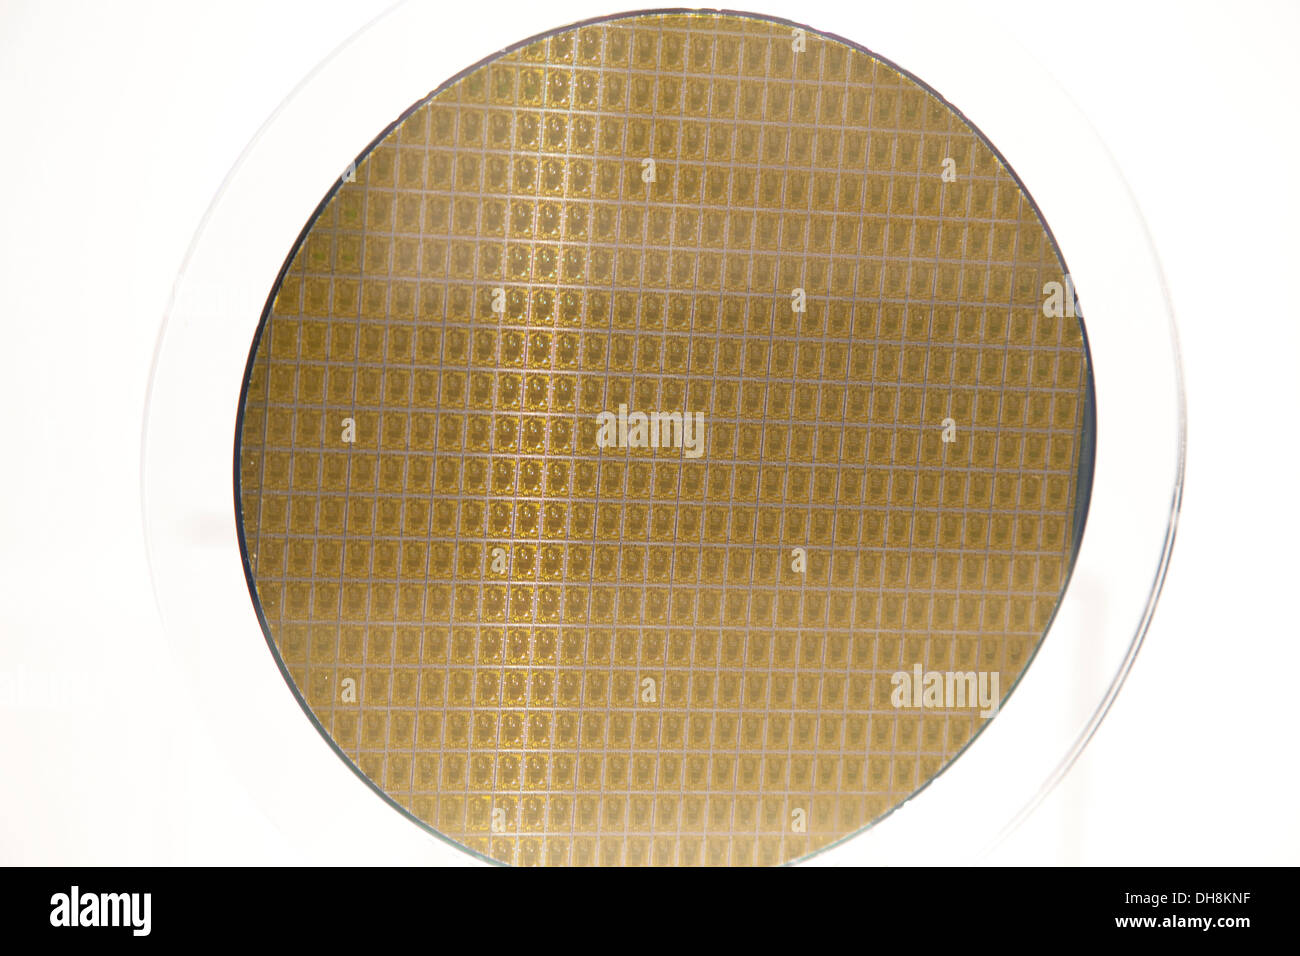 Silicon computer chip wafer Stock Photo